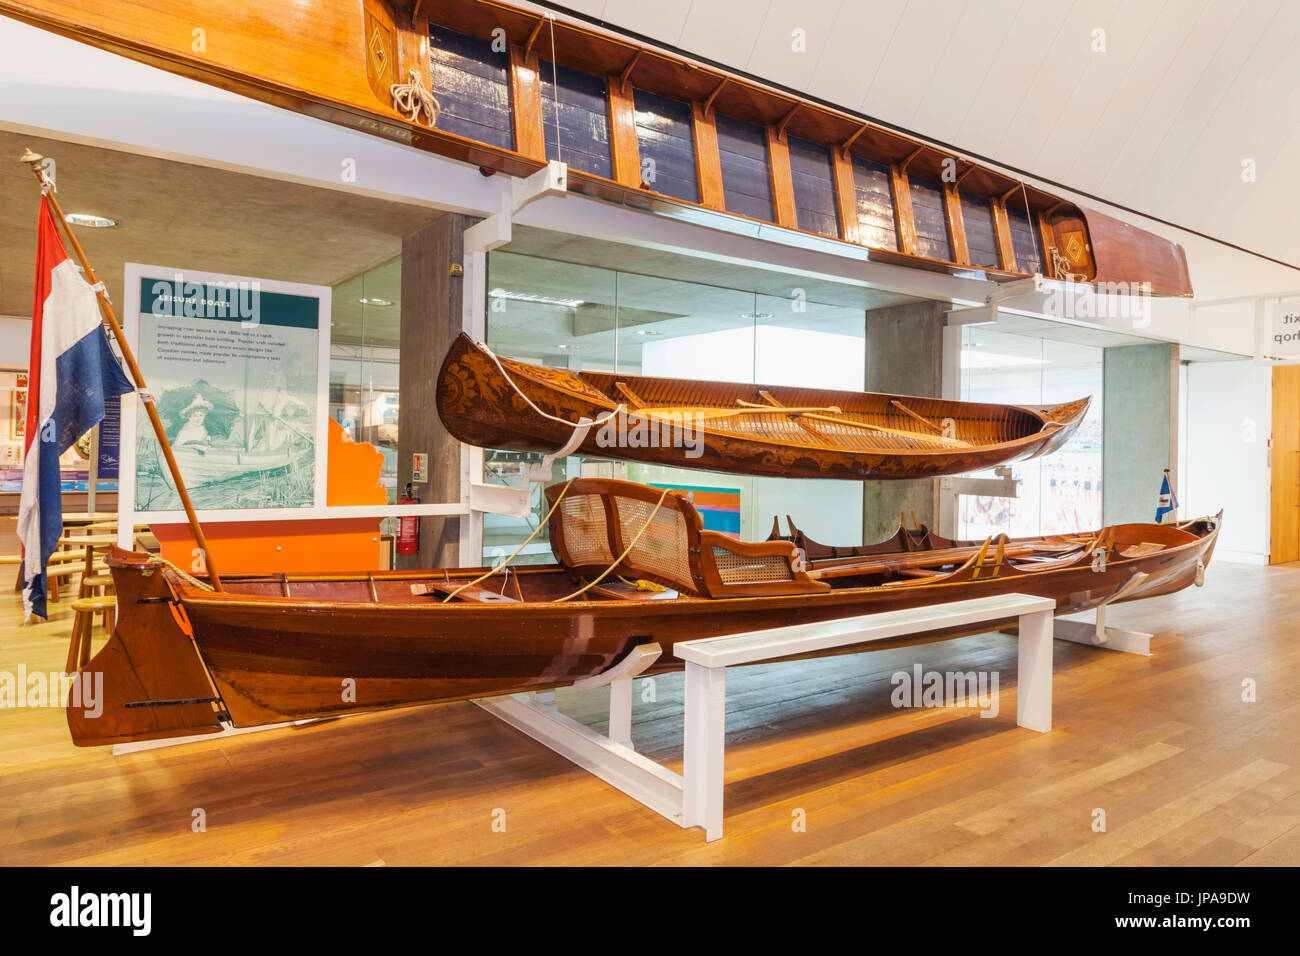 England, Oxfordshire, Henley-on-Thames, River and Rowing Museum, Display of Historical Leisure Boats Stock Photo